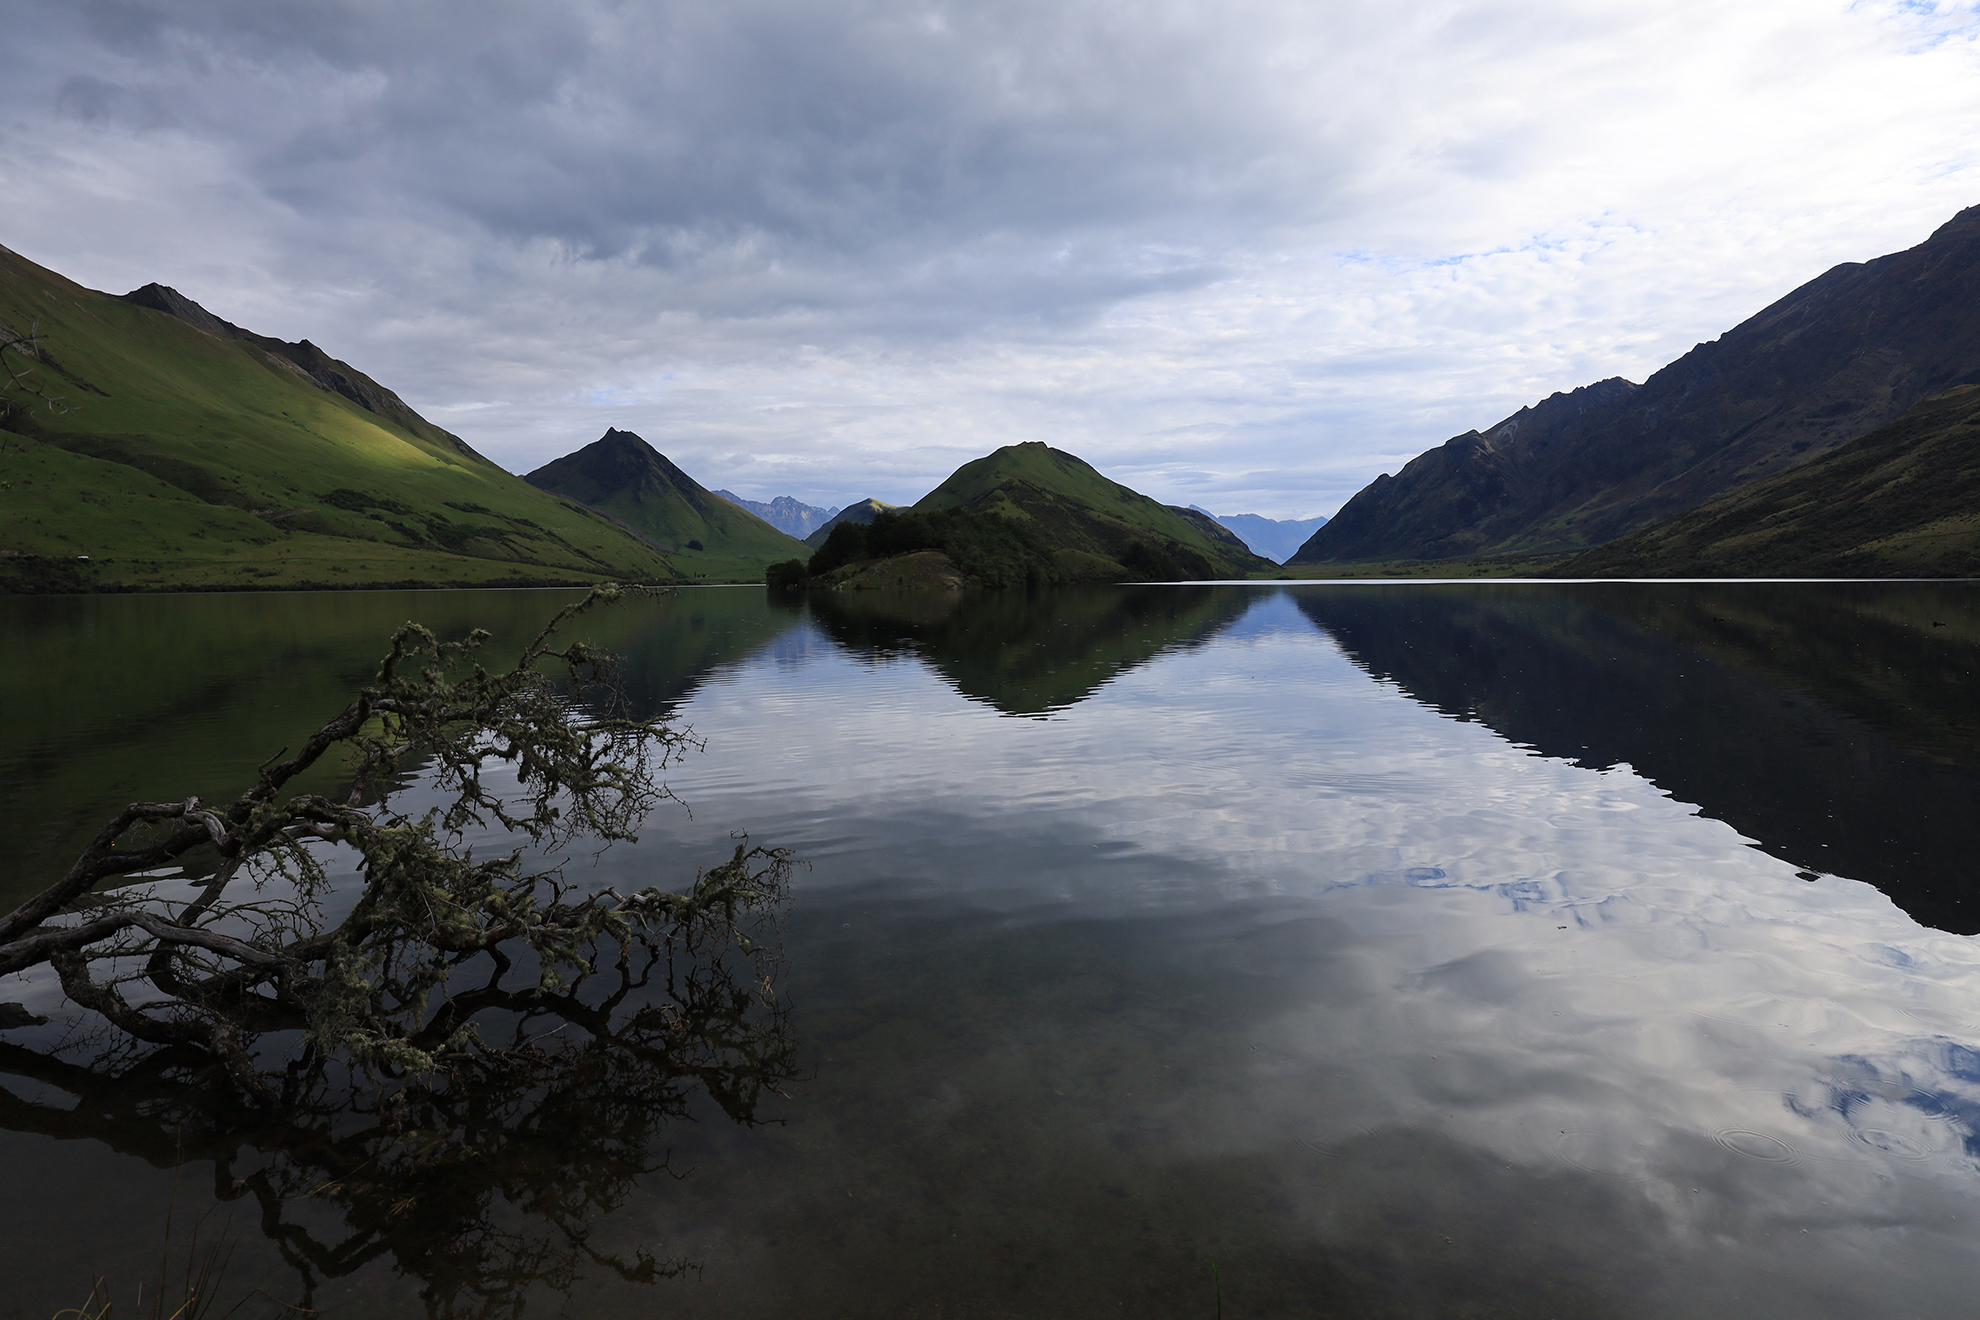 Wide-angle shot of a lake with green mountains in the backgroud and clouds reflecting in the water